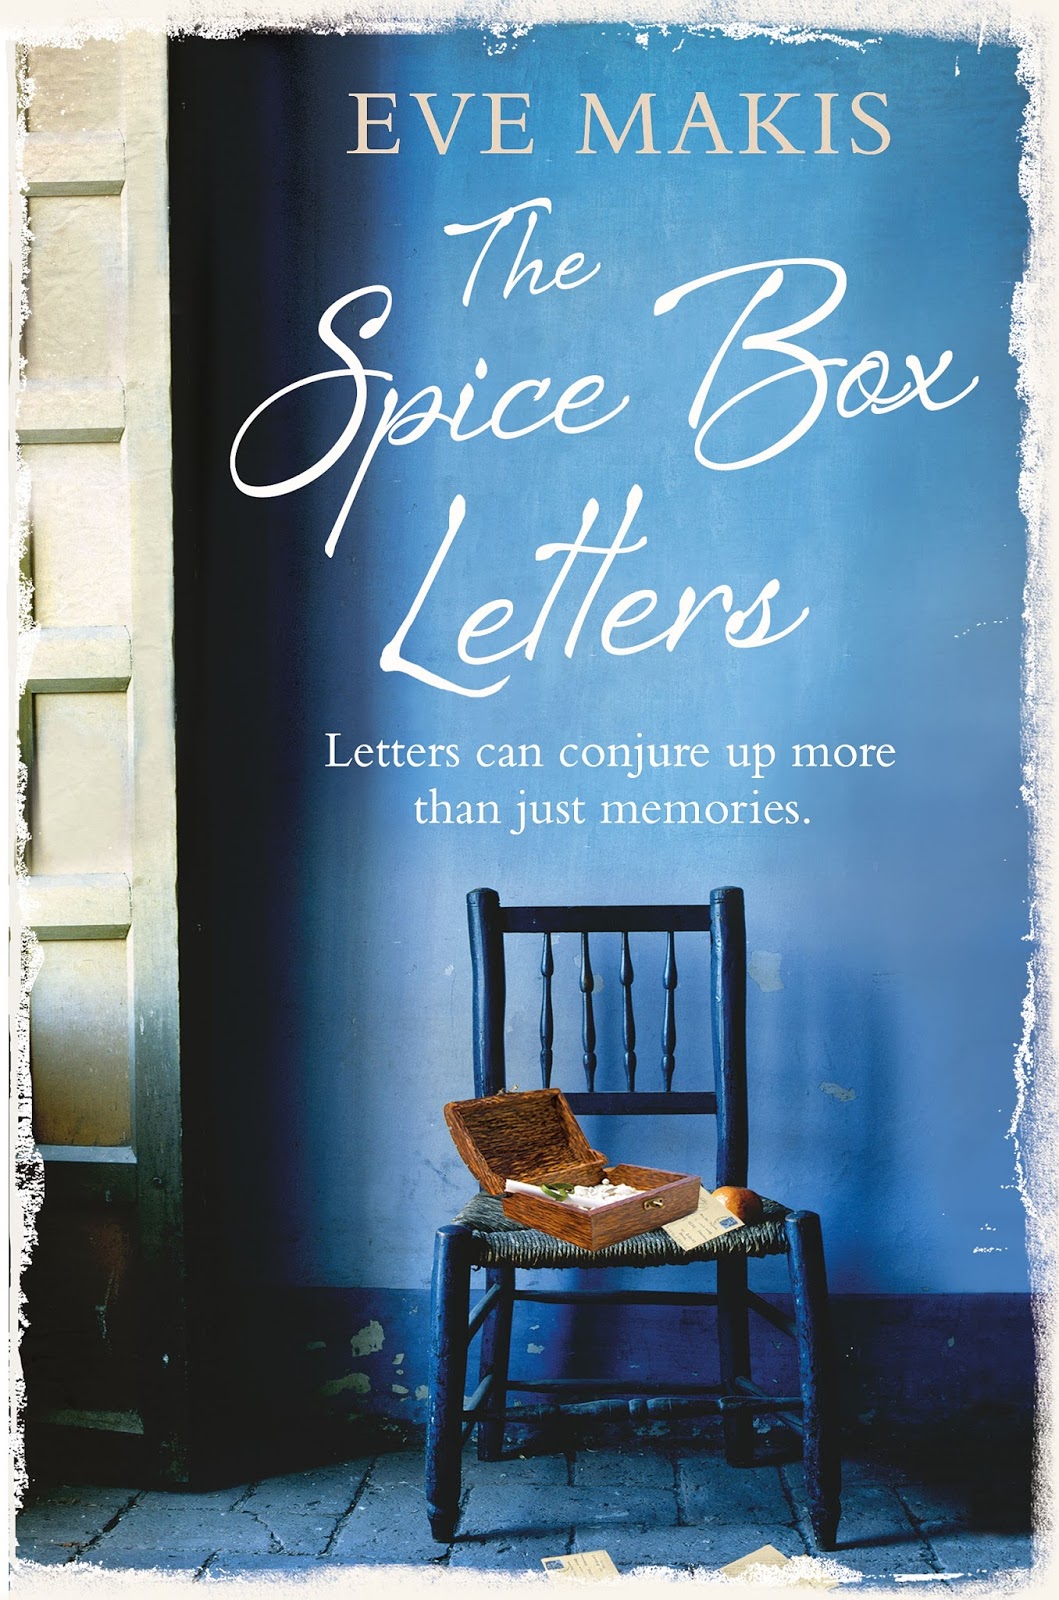 The Spice Box Letters: A Novel